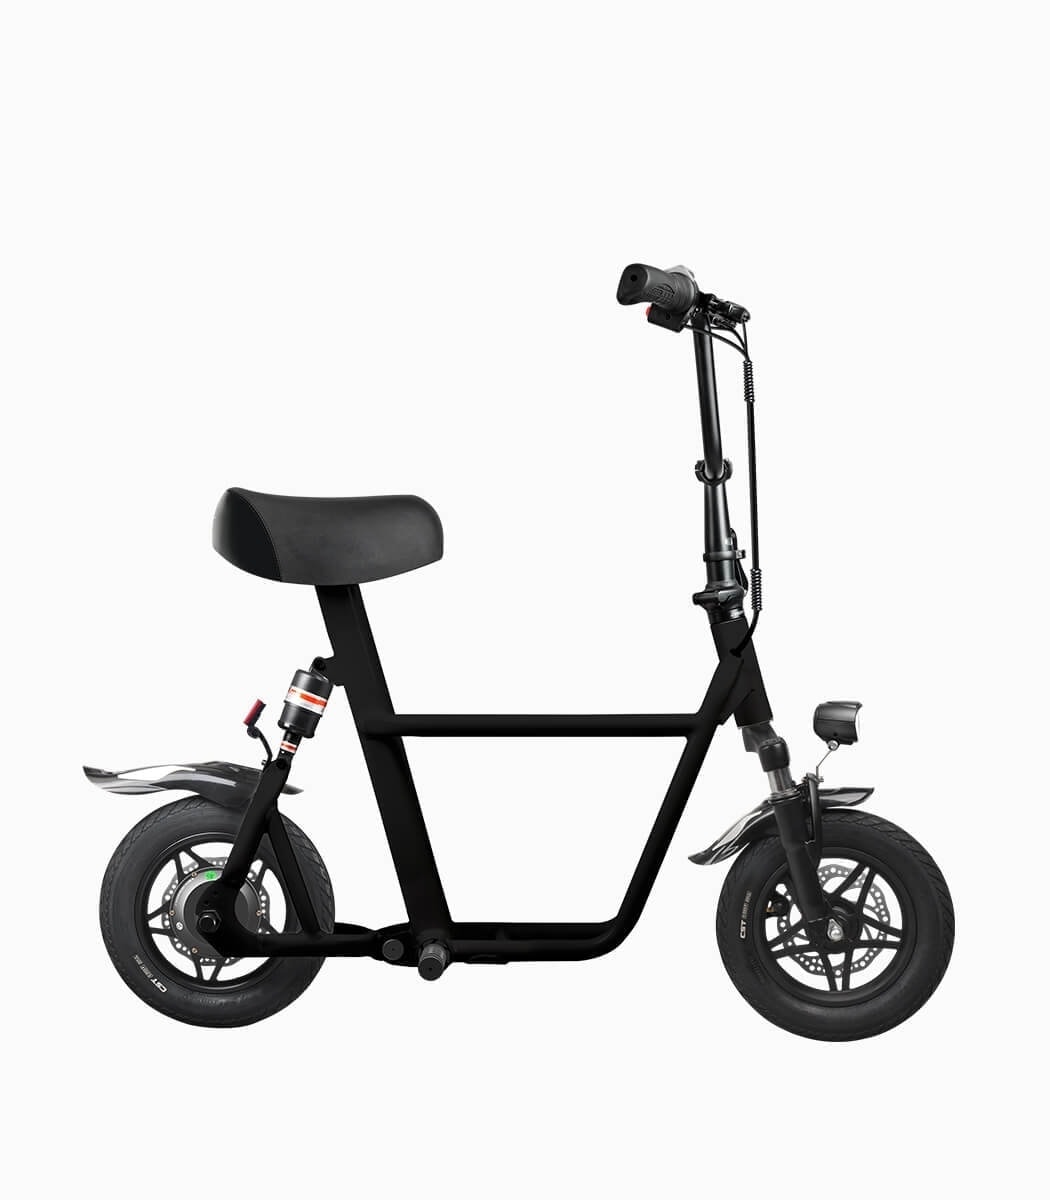 FIIDO Q1S (BLACK10AH) UL2272 certified seated electric scooter right